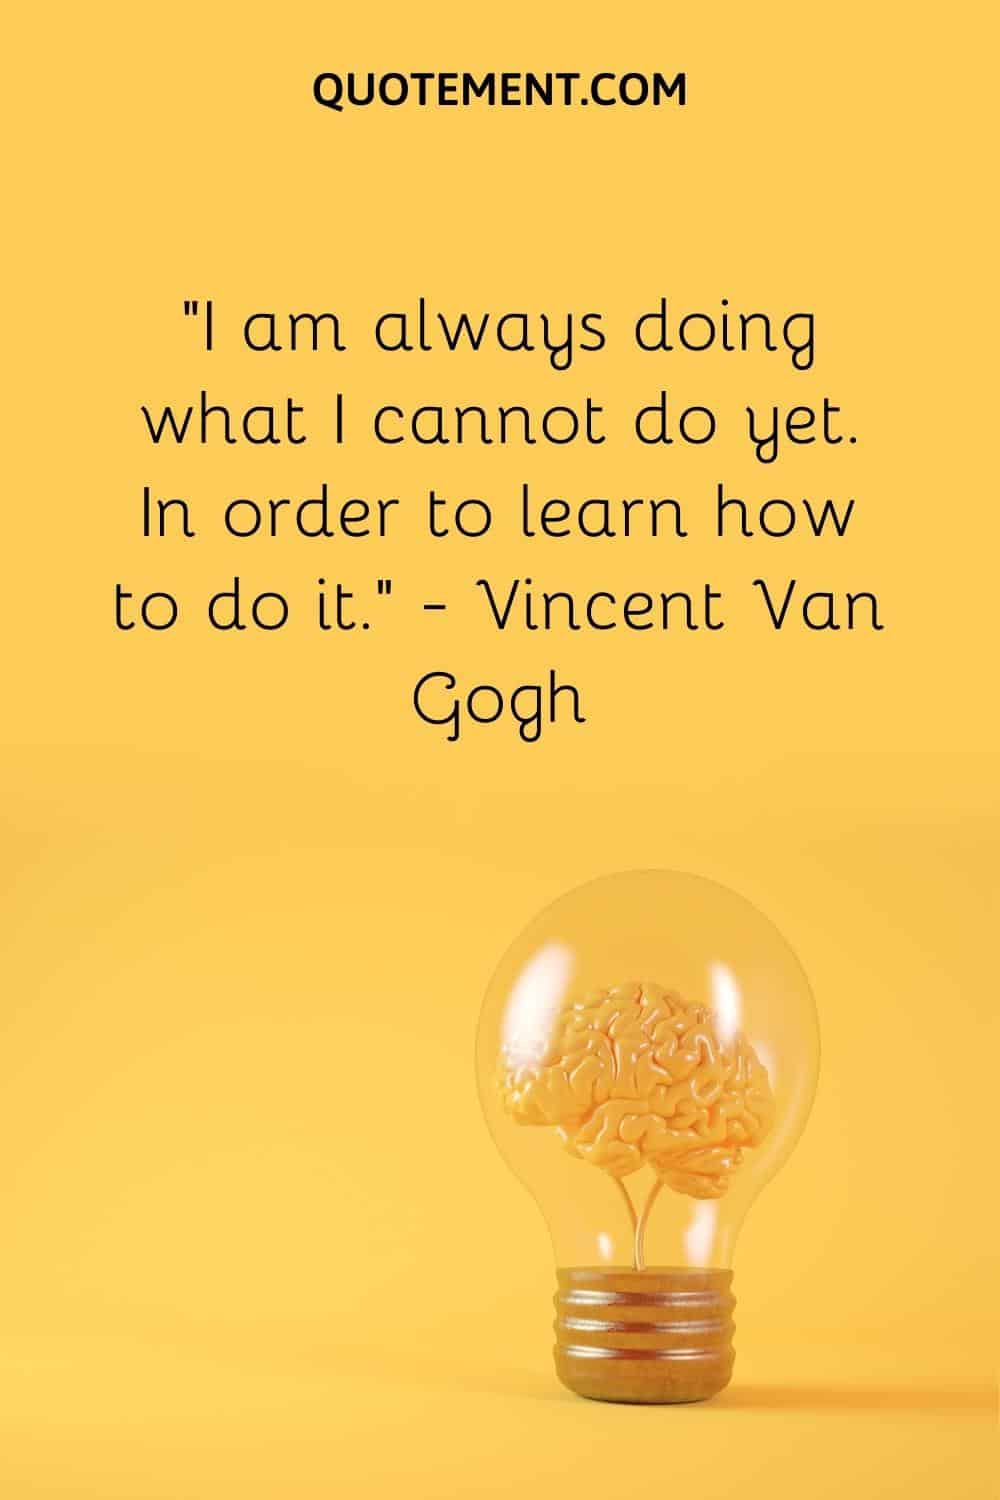 “I am always doing what I cannot do yet. In order to learn how to do it.” — Vincent Van Gogh
